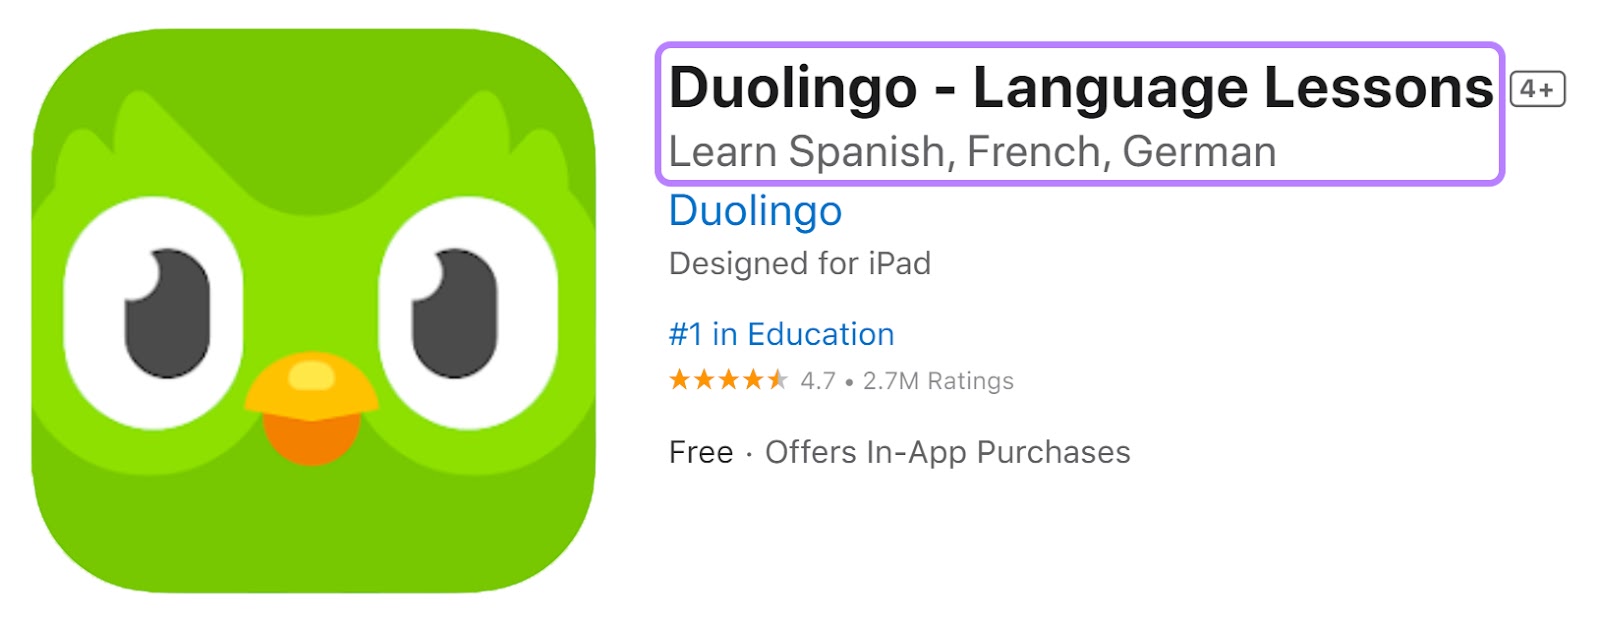 Duolingo's app title and subtitle that read "Duolingo - Language Lessons" "Learn Spanish, French, German"